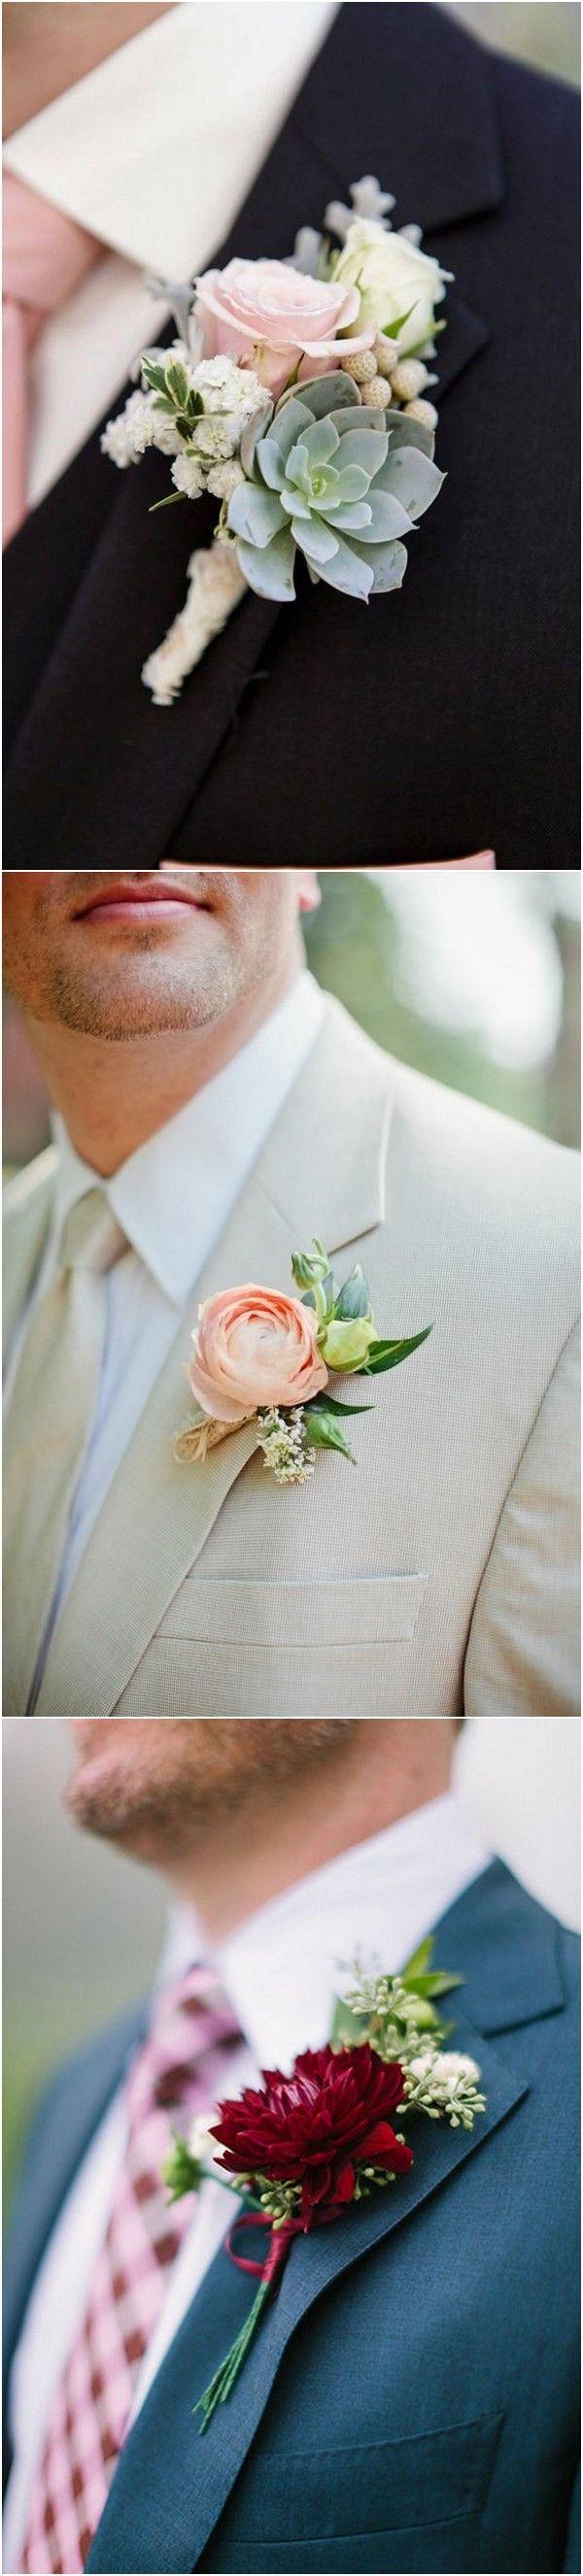 Hochzeit - 20 Fabulous Wedding Boutonnieres For Groom And Groomsmen - Page 2 Of 3